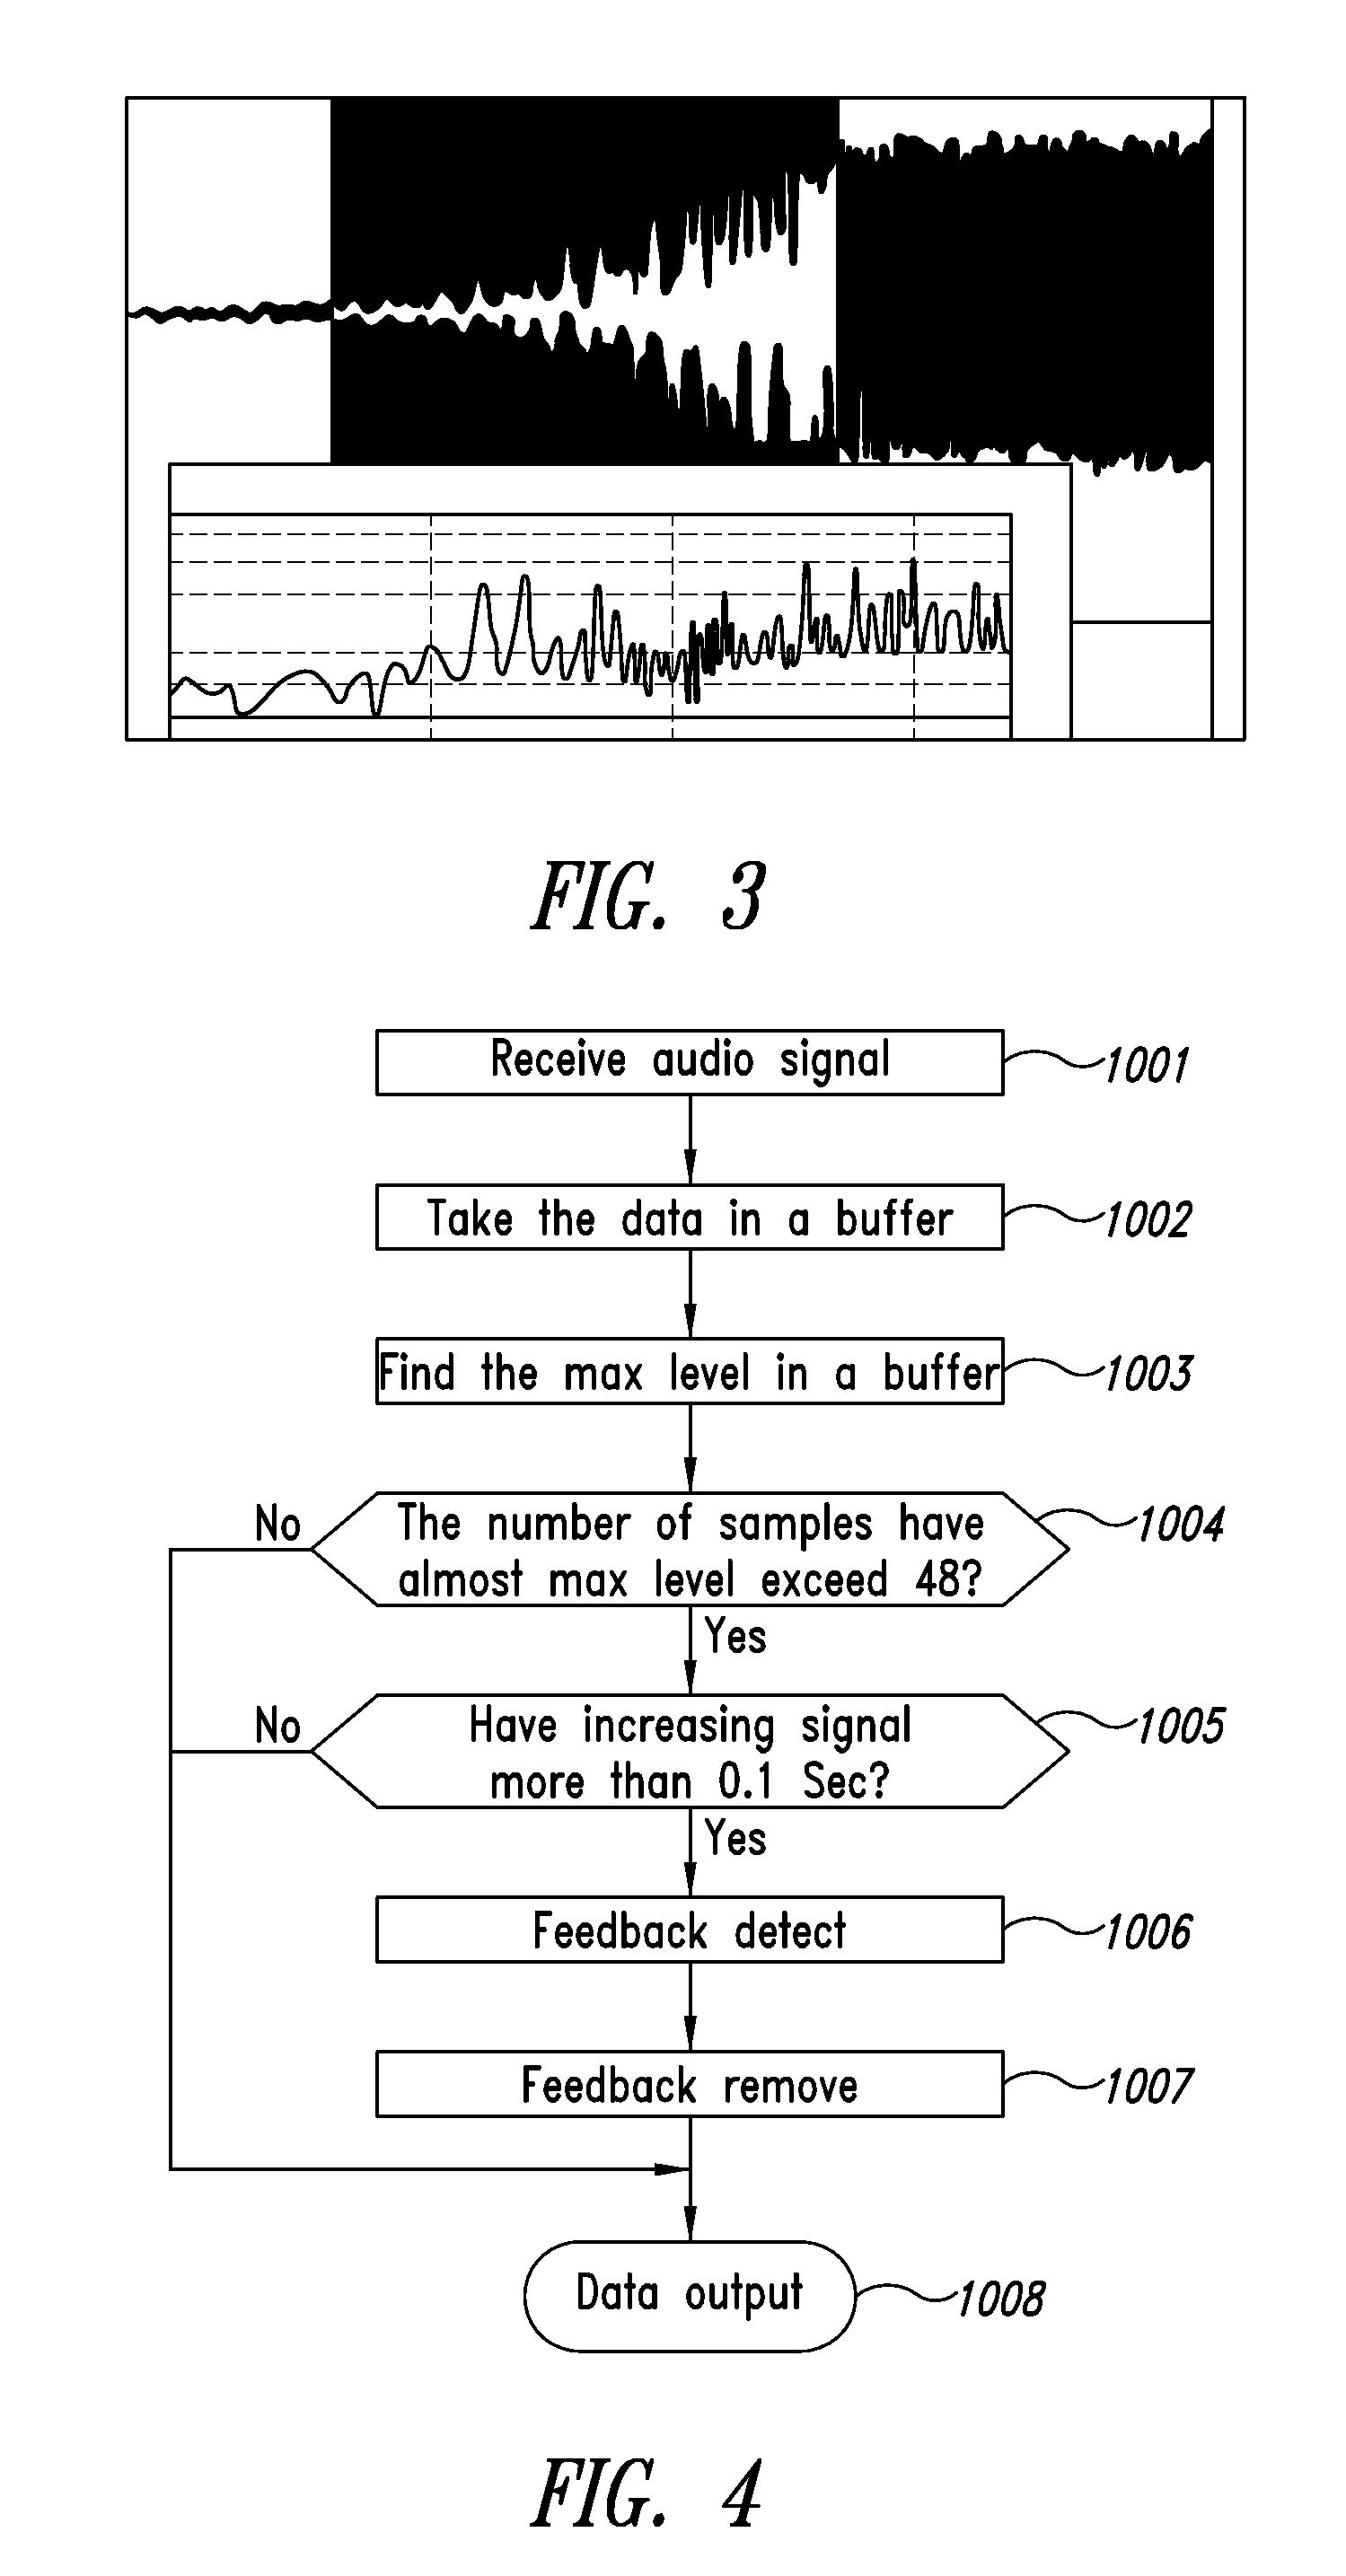 System and method for increasing a feedback detection rate in an audio system